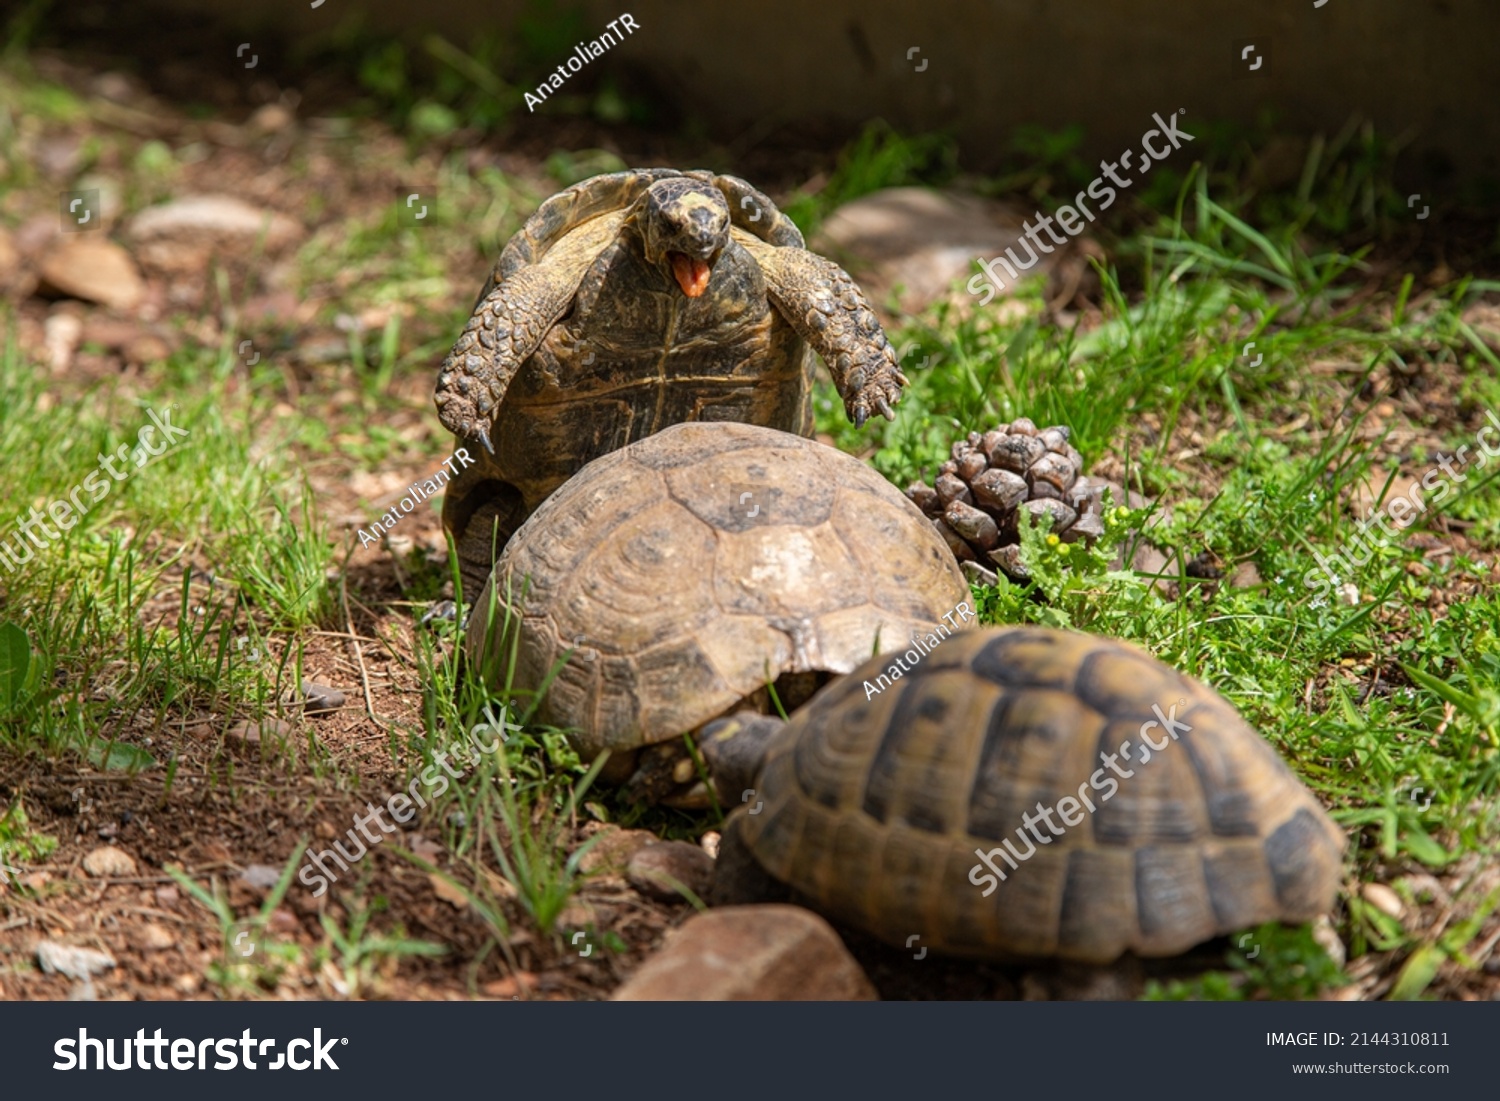 Selective focus of tortoises mating. While one male mates with the female, the other male inhibits the female. Nature, wildlife, reproduction, continuation of lineage, basic instinct concept. #2144310811